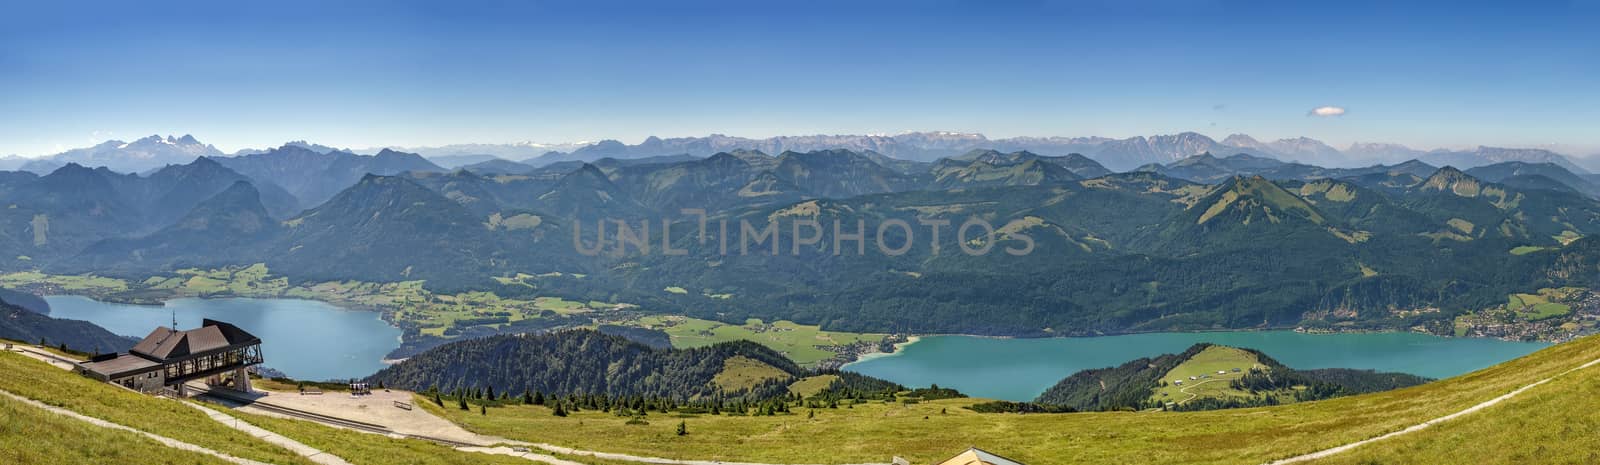 Panoramic view of Alps mountain with Wolfgangsee lake from Schafberg mountain, Austria